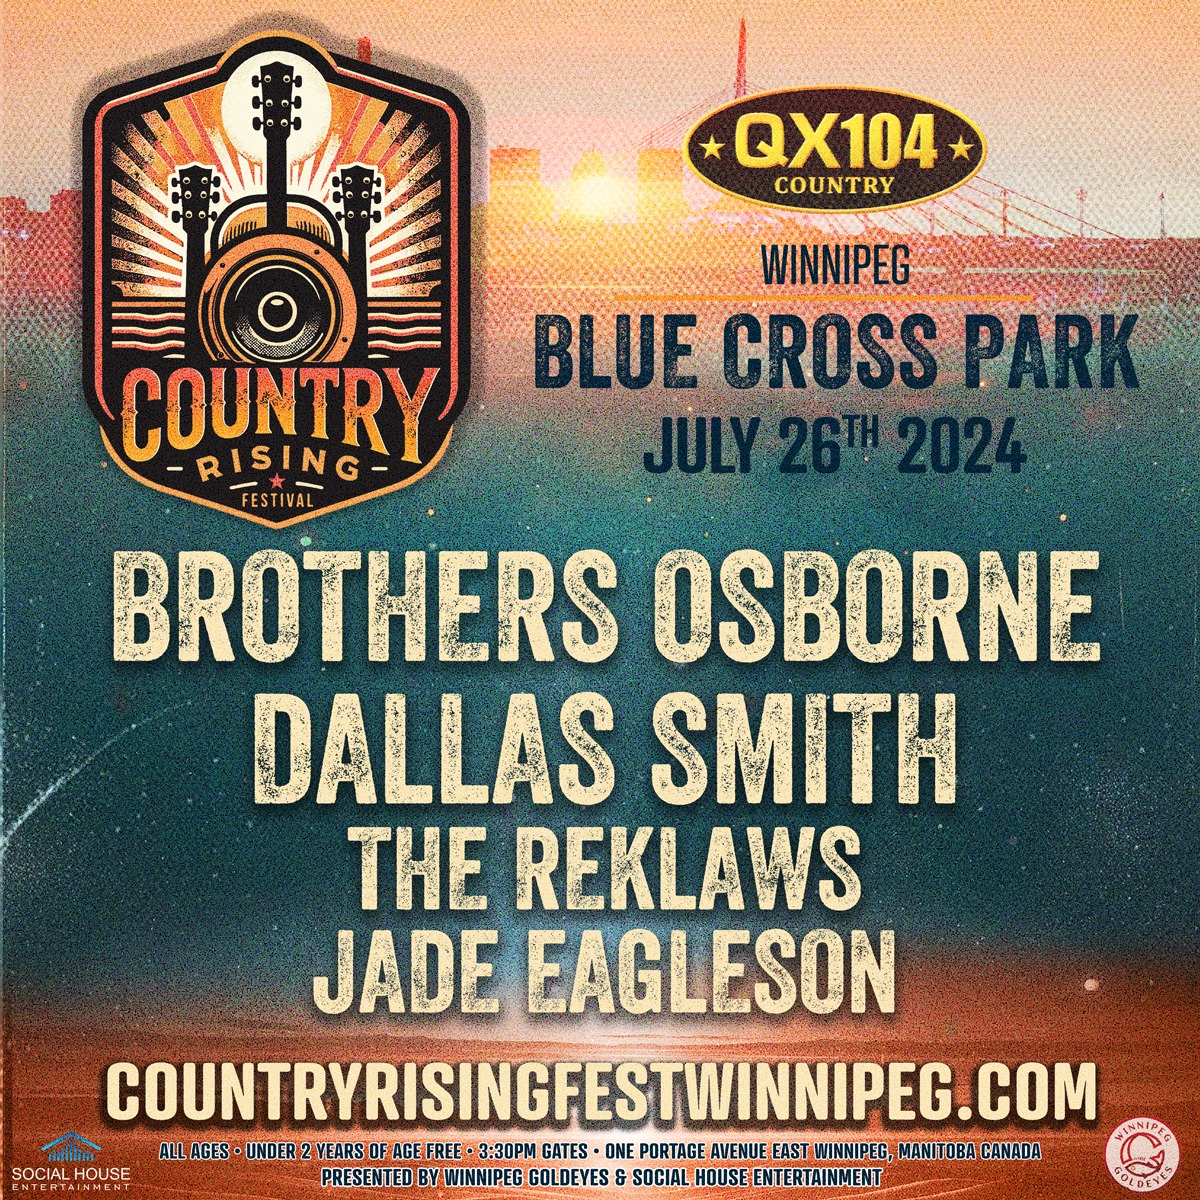 QX104, Social House Entertainment and the @Wpg_Goldeyes are proud to announce the all-new Country Rising Music Festival coming to Blue Cross Park on Friday, July 26th, 2024! #BrodyAndKarly @brothersosborne @dallassmith @thereklaws @JadeEagleson and more!